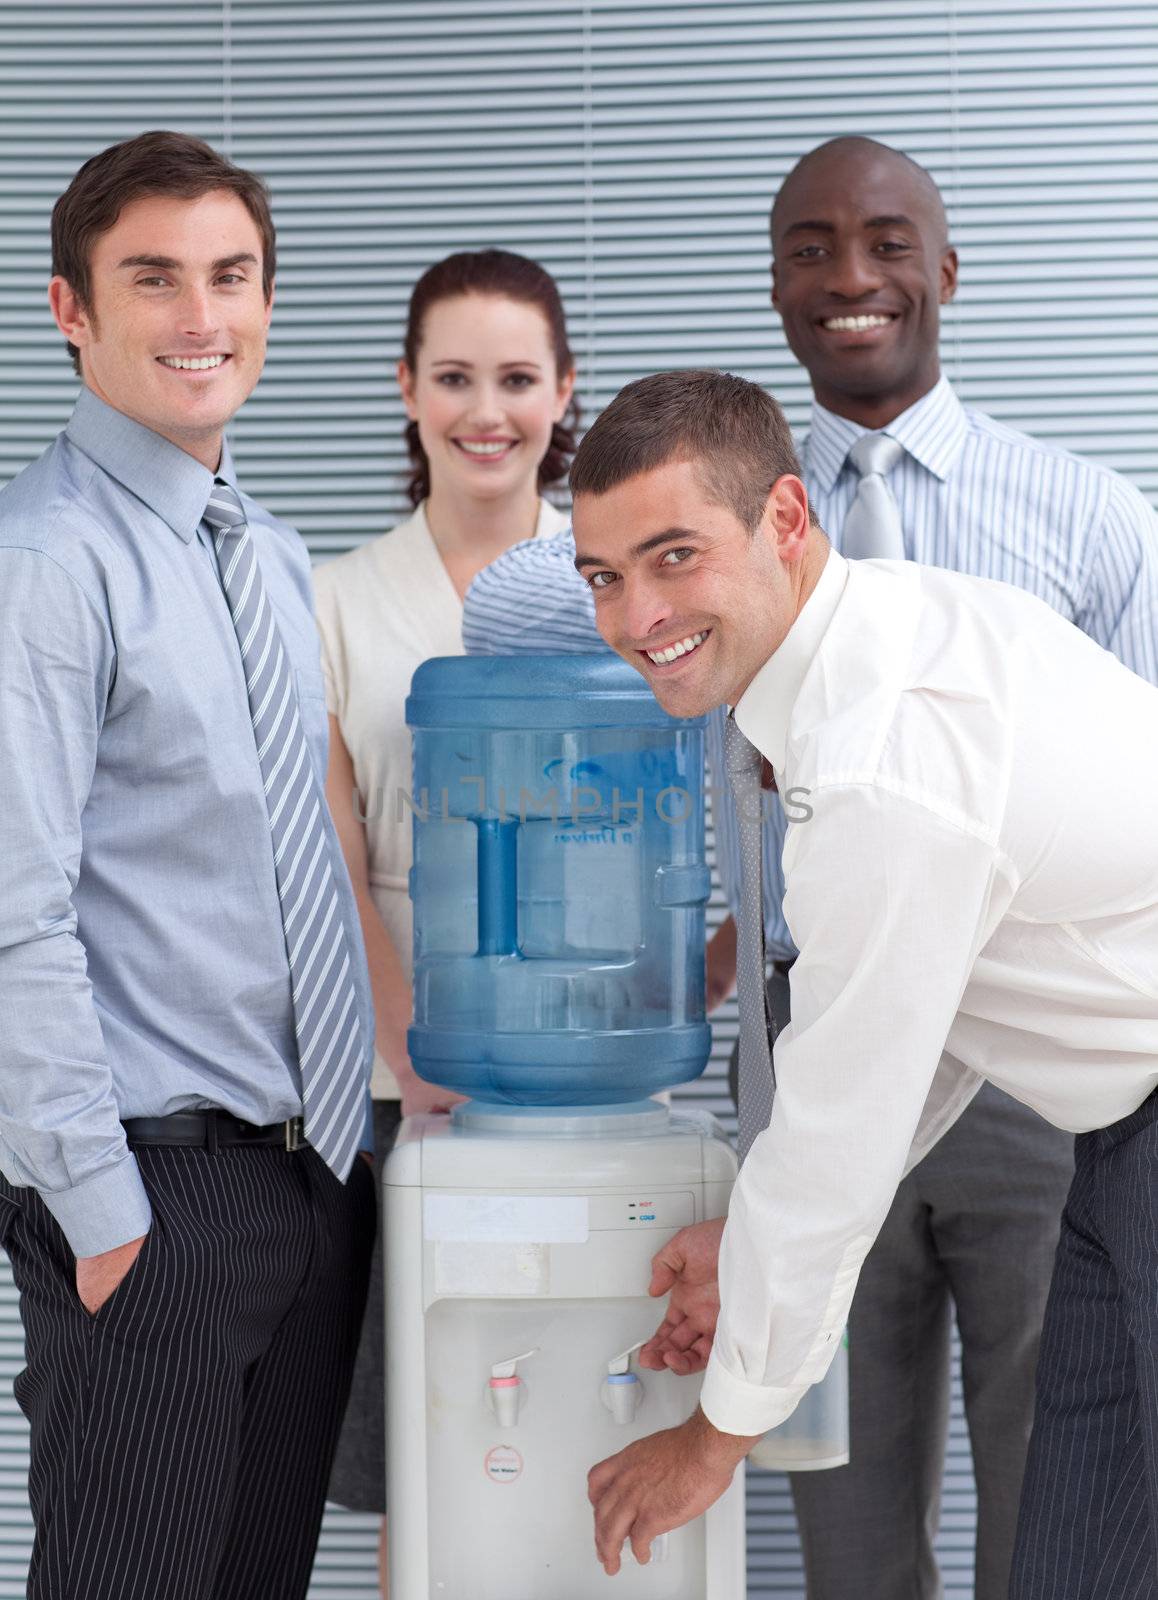 Busines people standing around water cooler in workplace